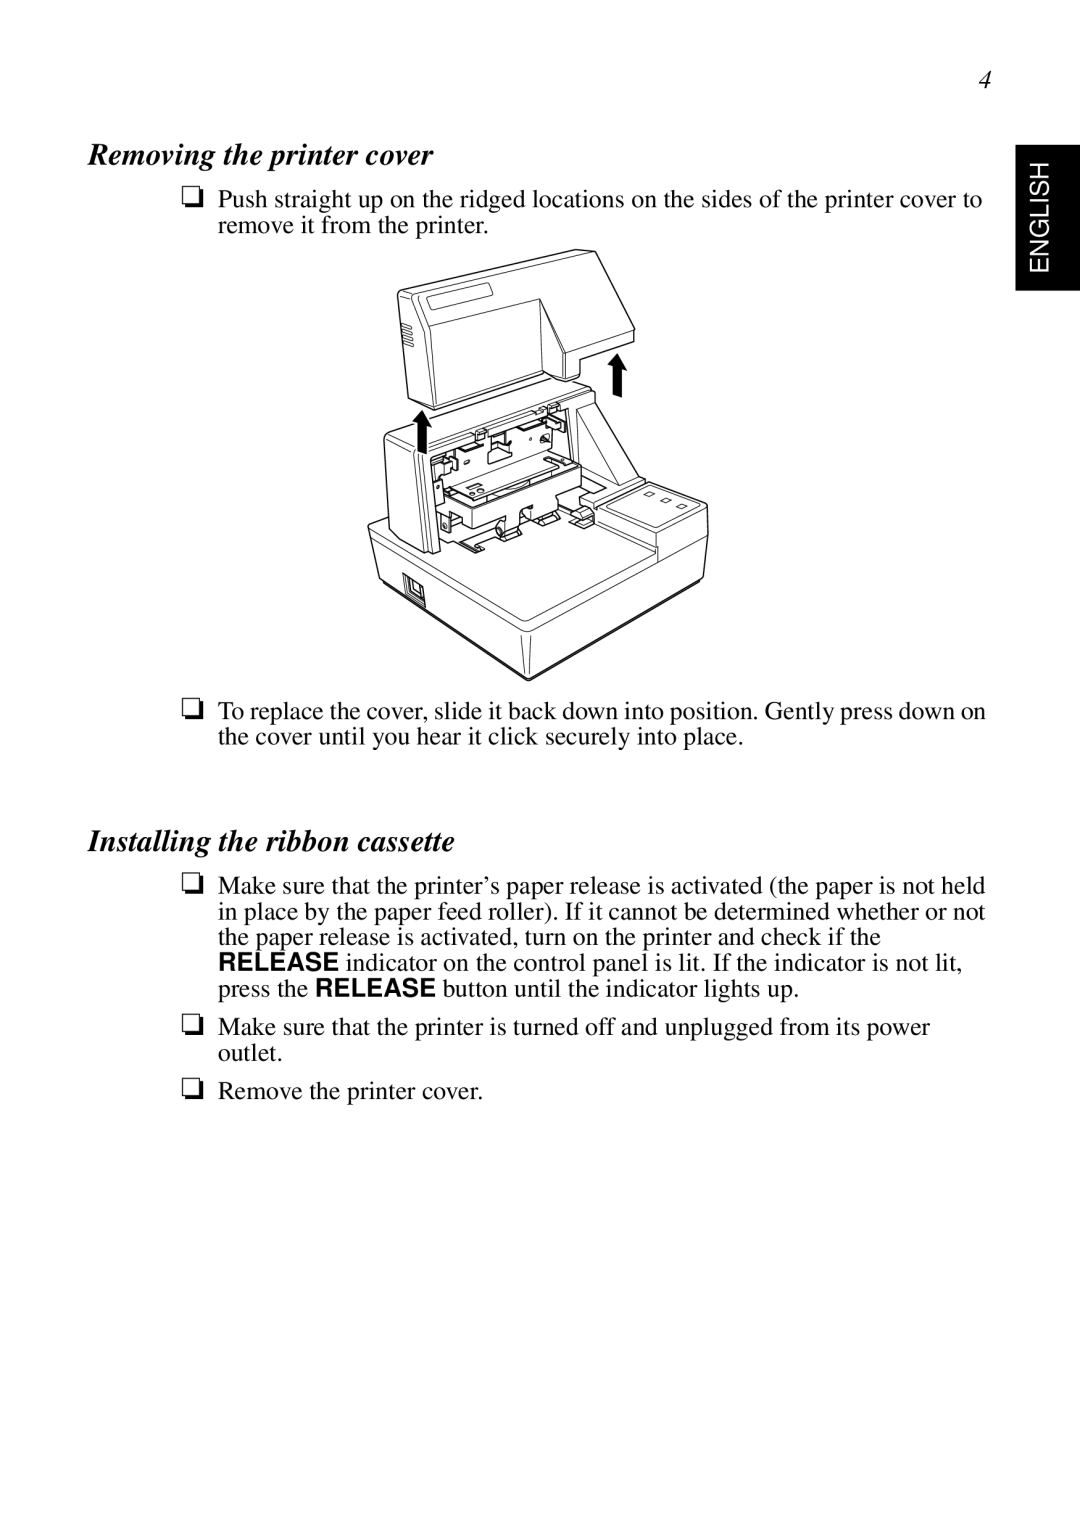 Star Micronics SP298 user manual Removing the printer cover, Installing the ribbon cassette, English 